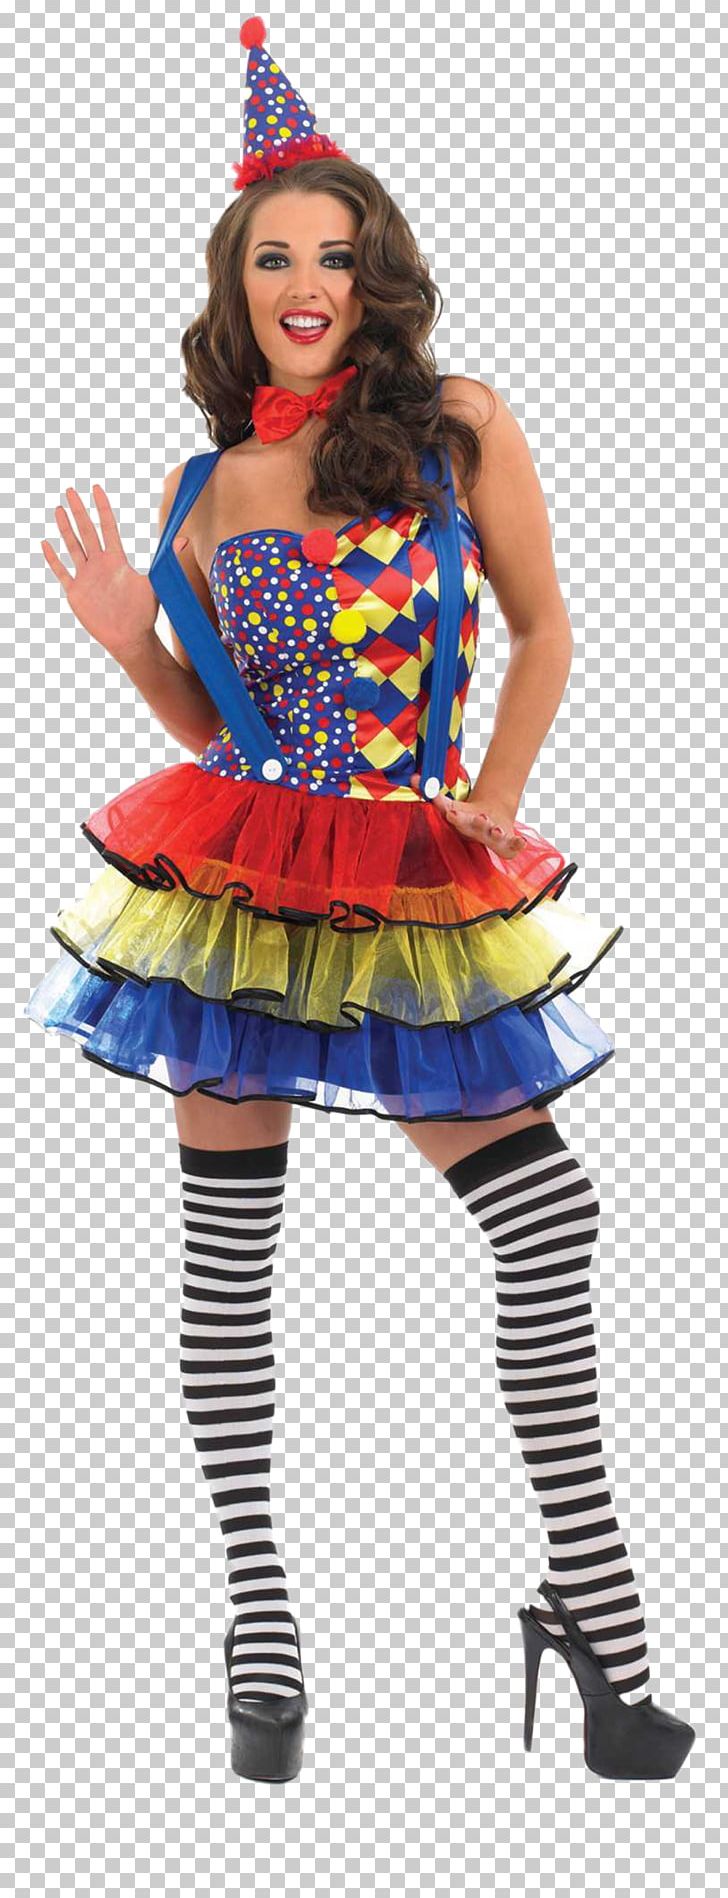 Costume Party Clown Dress Tutu PNG, Clipart, Adult, Braces, Circus, Circus Clown, Clothing Free PNG Download